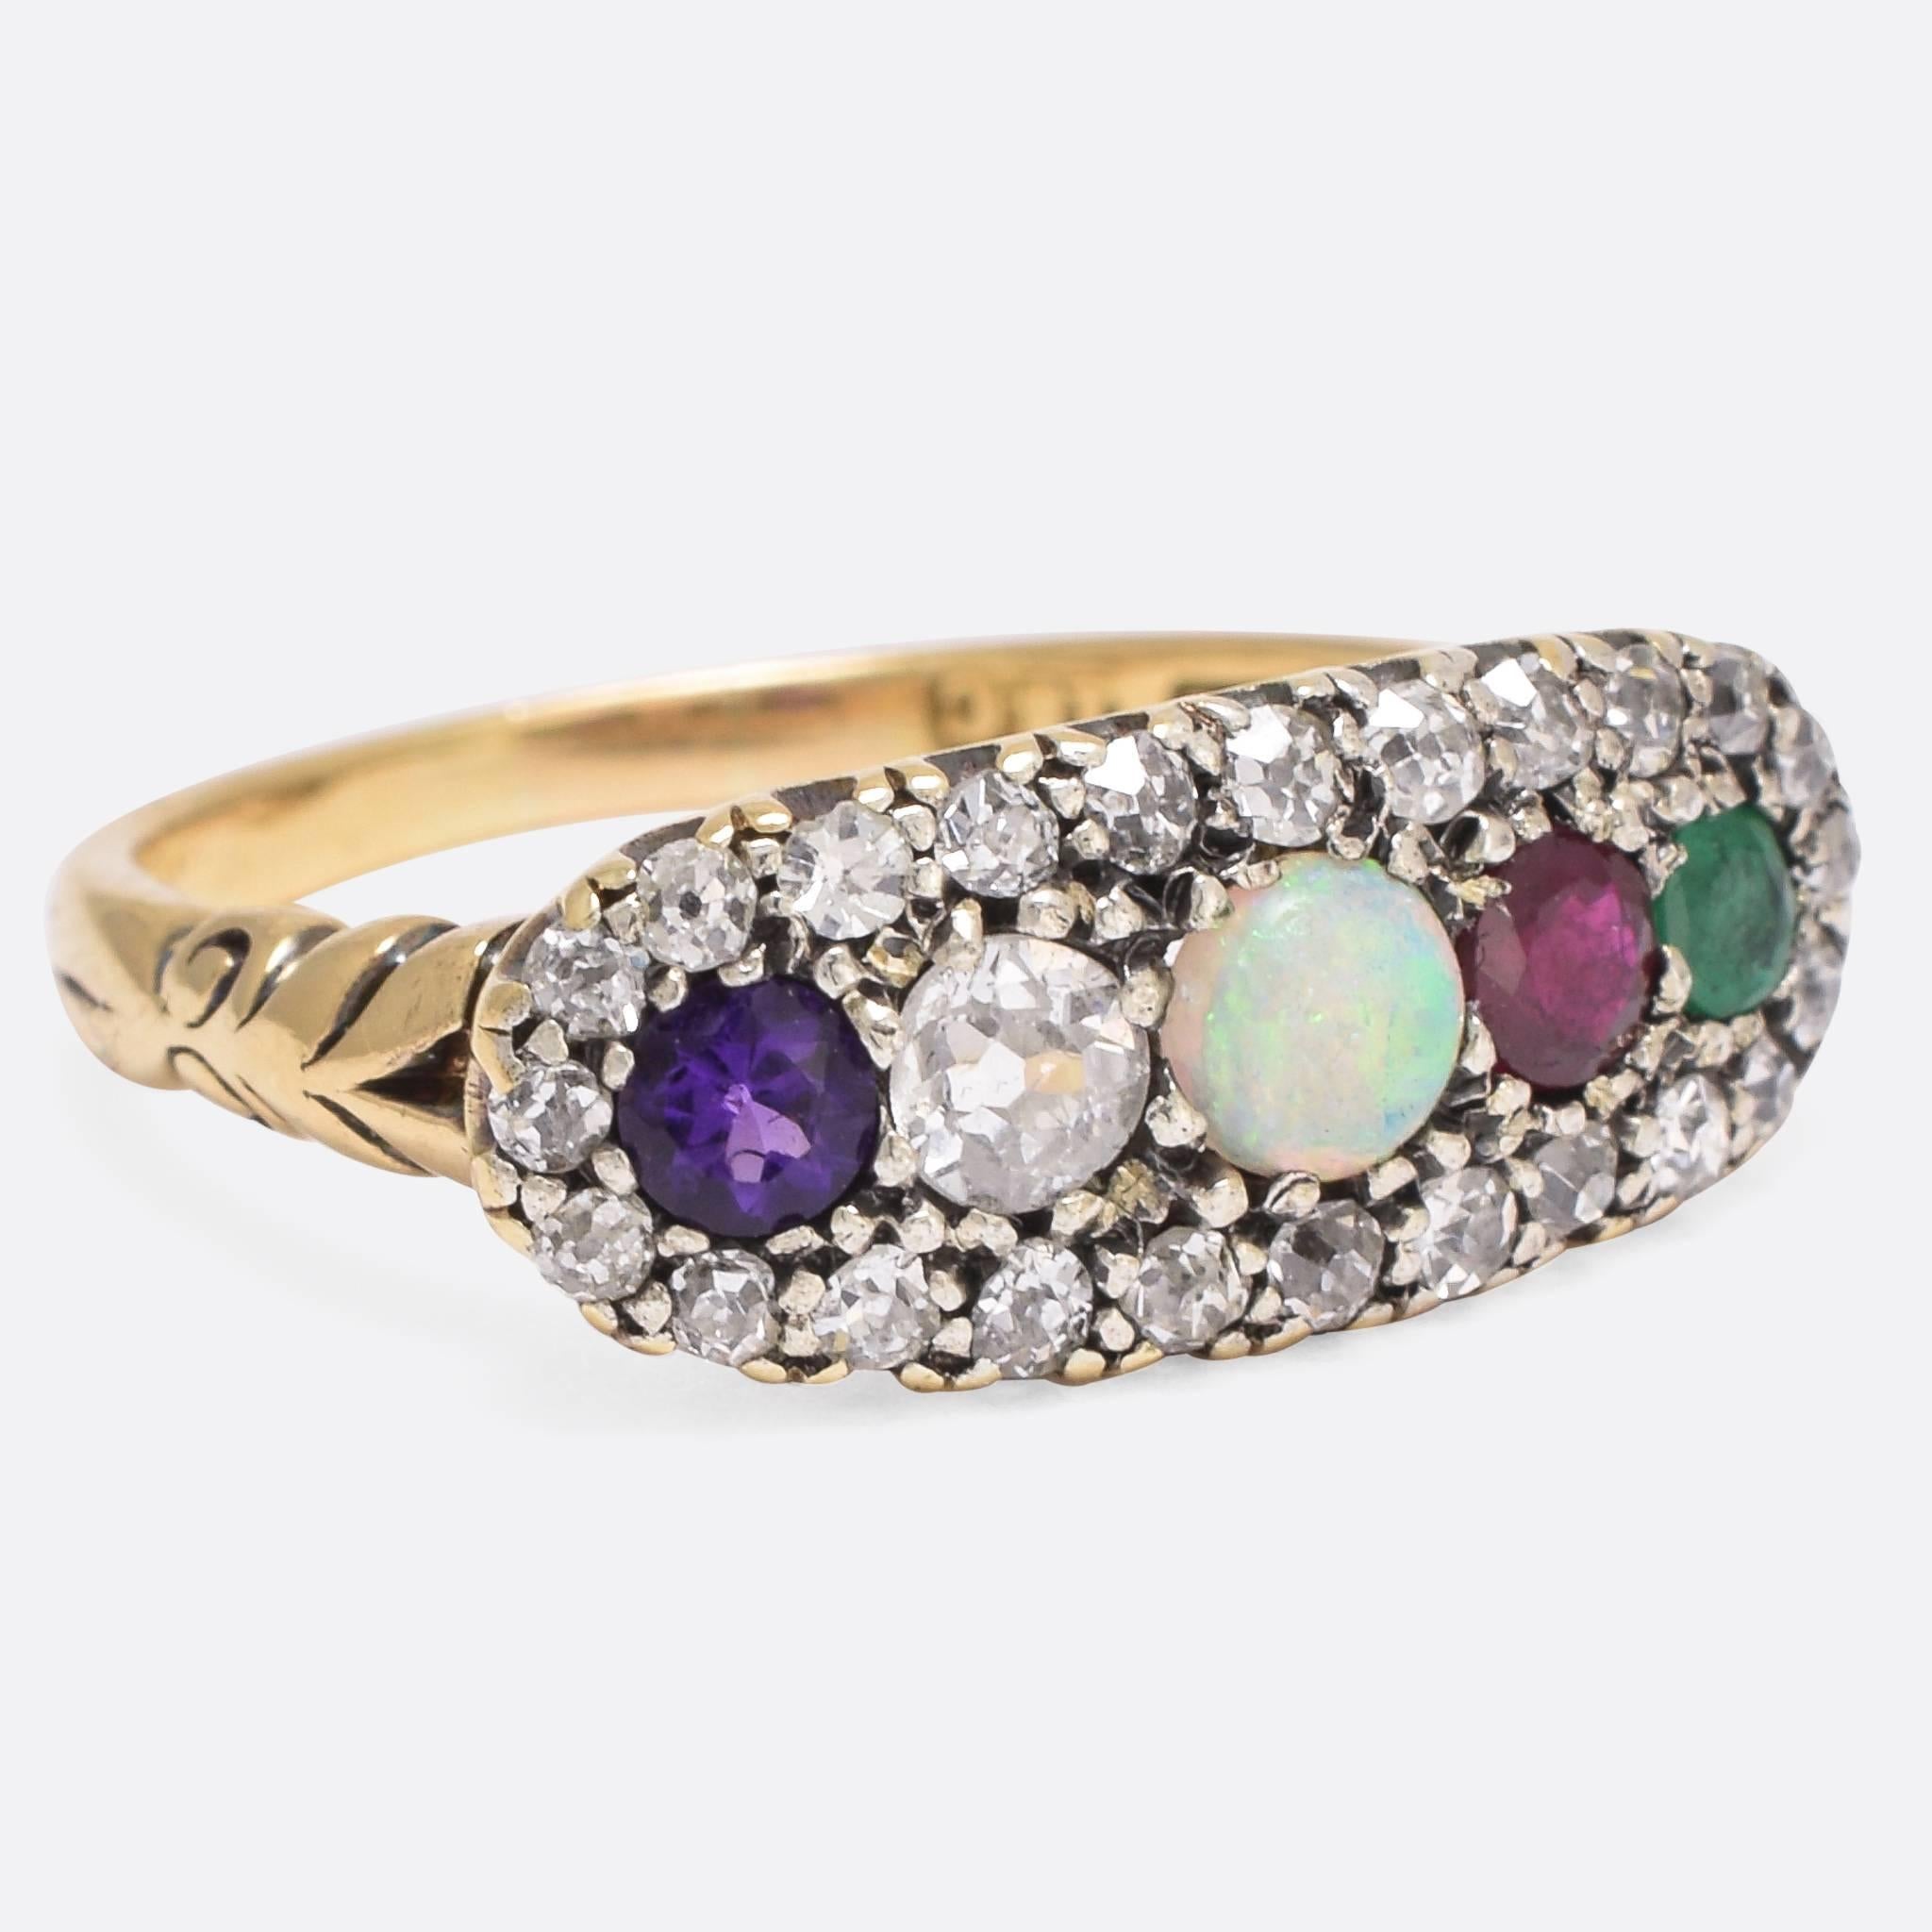 A rare and beautiful antique Acrostic ring, the principal stones spell out the popular romantic sentiment "ADORE" - taking the first letter of each stone to make up the secret message. Amethyst, Diamond, Opal, Ruby and Emerald. This is a